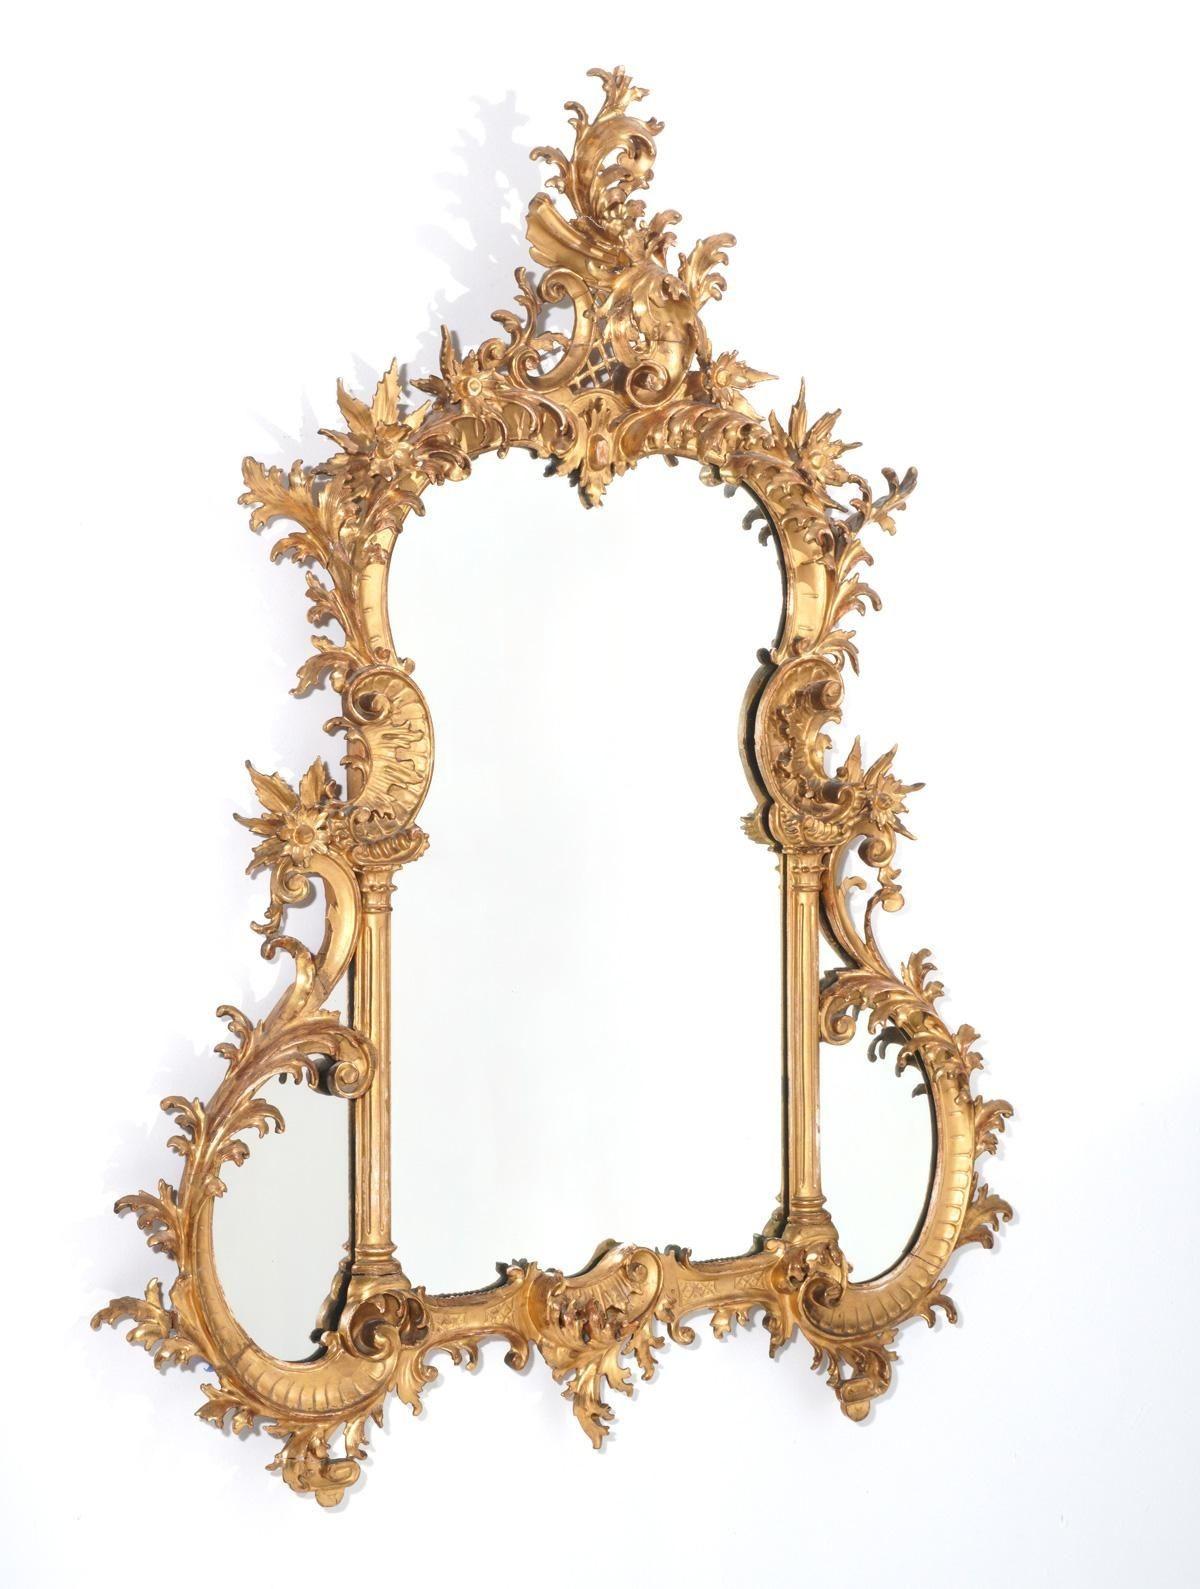 An amazing hand-carved gilt wood Rococo style mirror decorated with foliate scroll details all around the frame. Made in Italy, 19th Century. 
Dimensions:
49